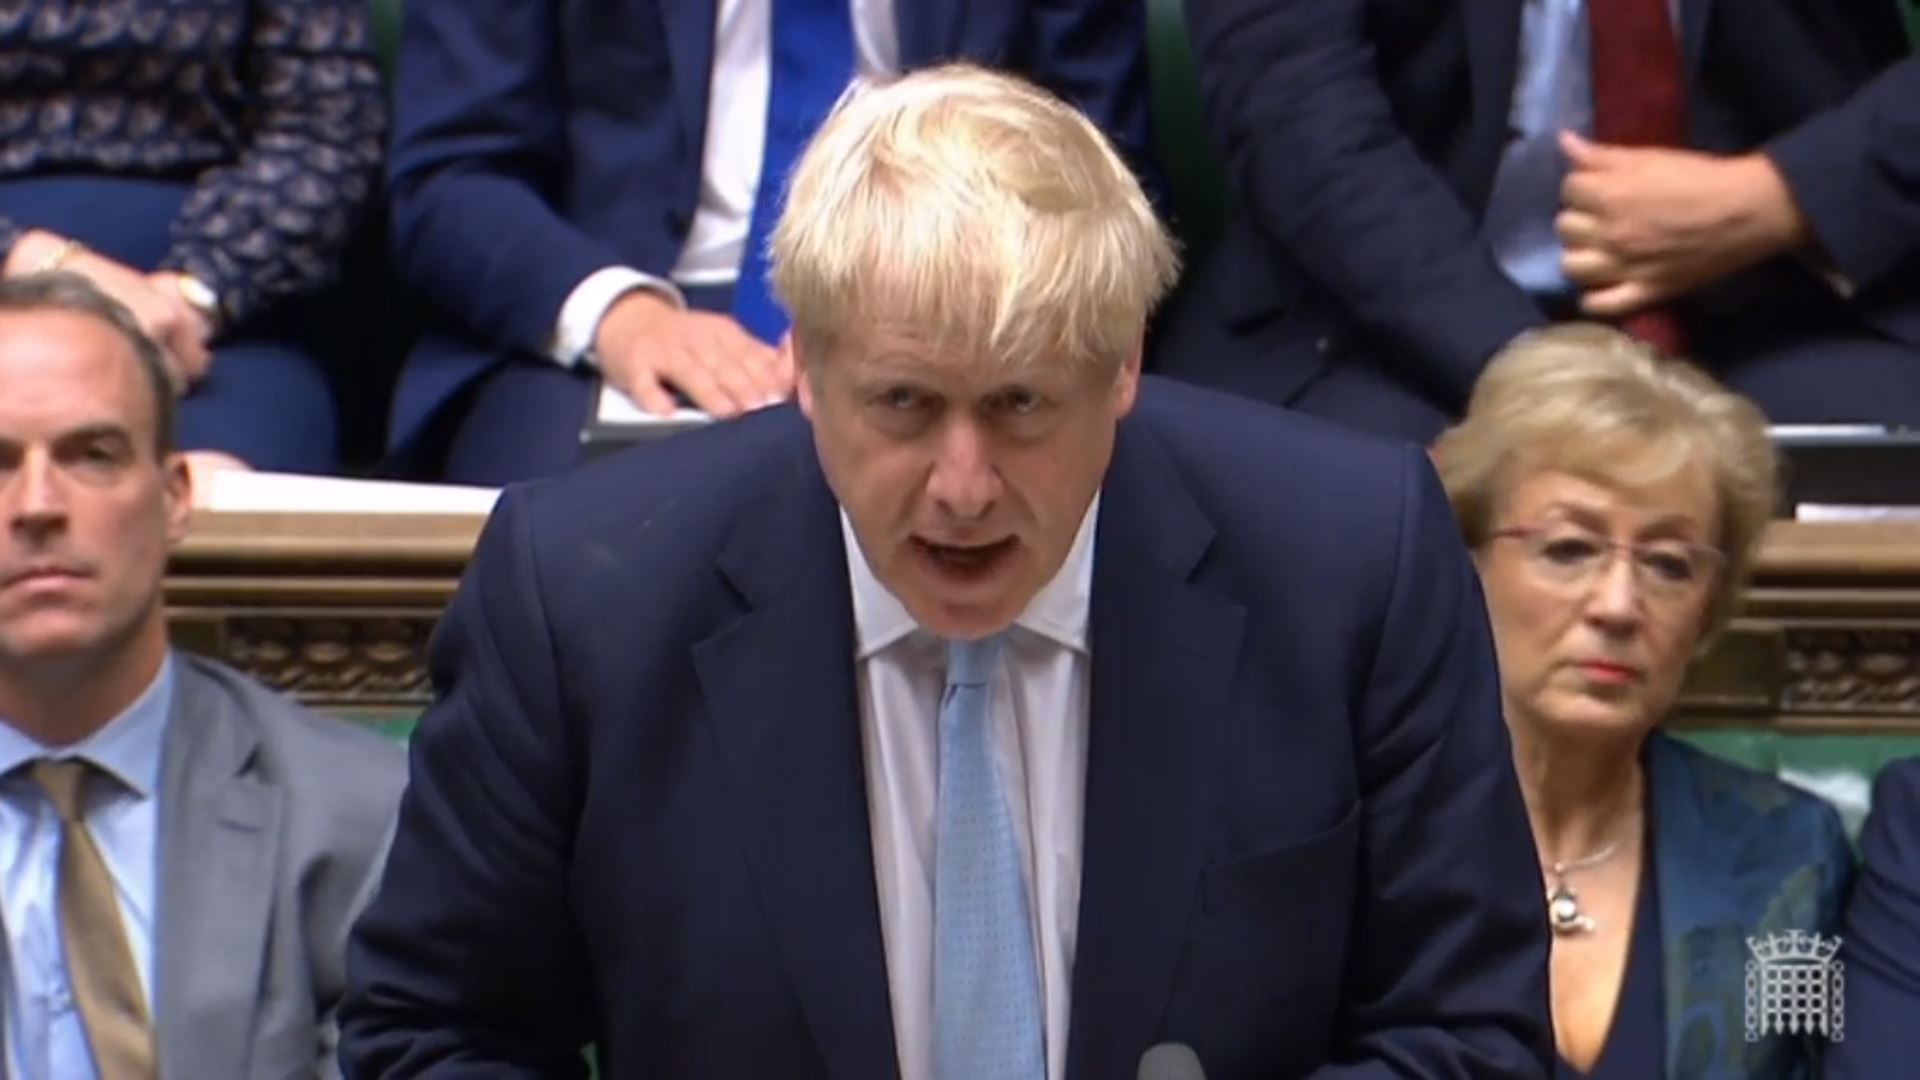 epa07891420 A grab from a handout video made available by the UK Parliamentary Recording Unit shows British Prime Minister Boris Johnson speaking during a session at the House of Commons in London, Britain, 03 October 2019. Boris Johnson was presenting to parliament his proposal for a Brexit deal.  EPA/UK PARLIAMENTARY RECORDING UNIT HANDOUT  HANDOUT EDITORIAL USE ONLY/NO SALES